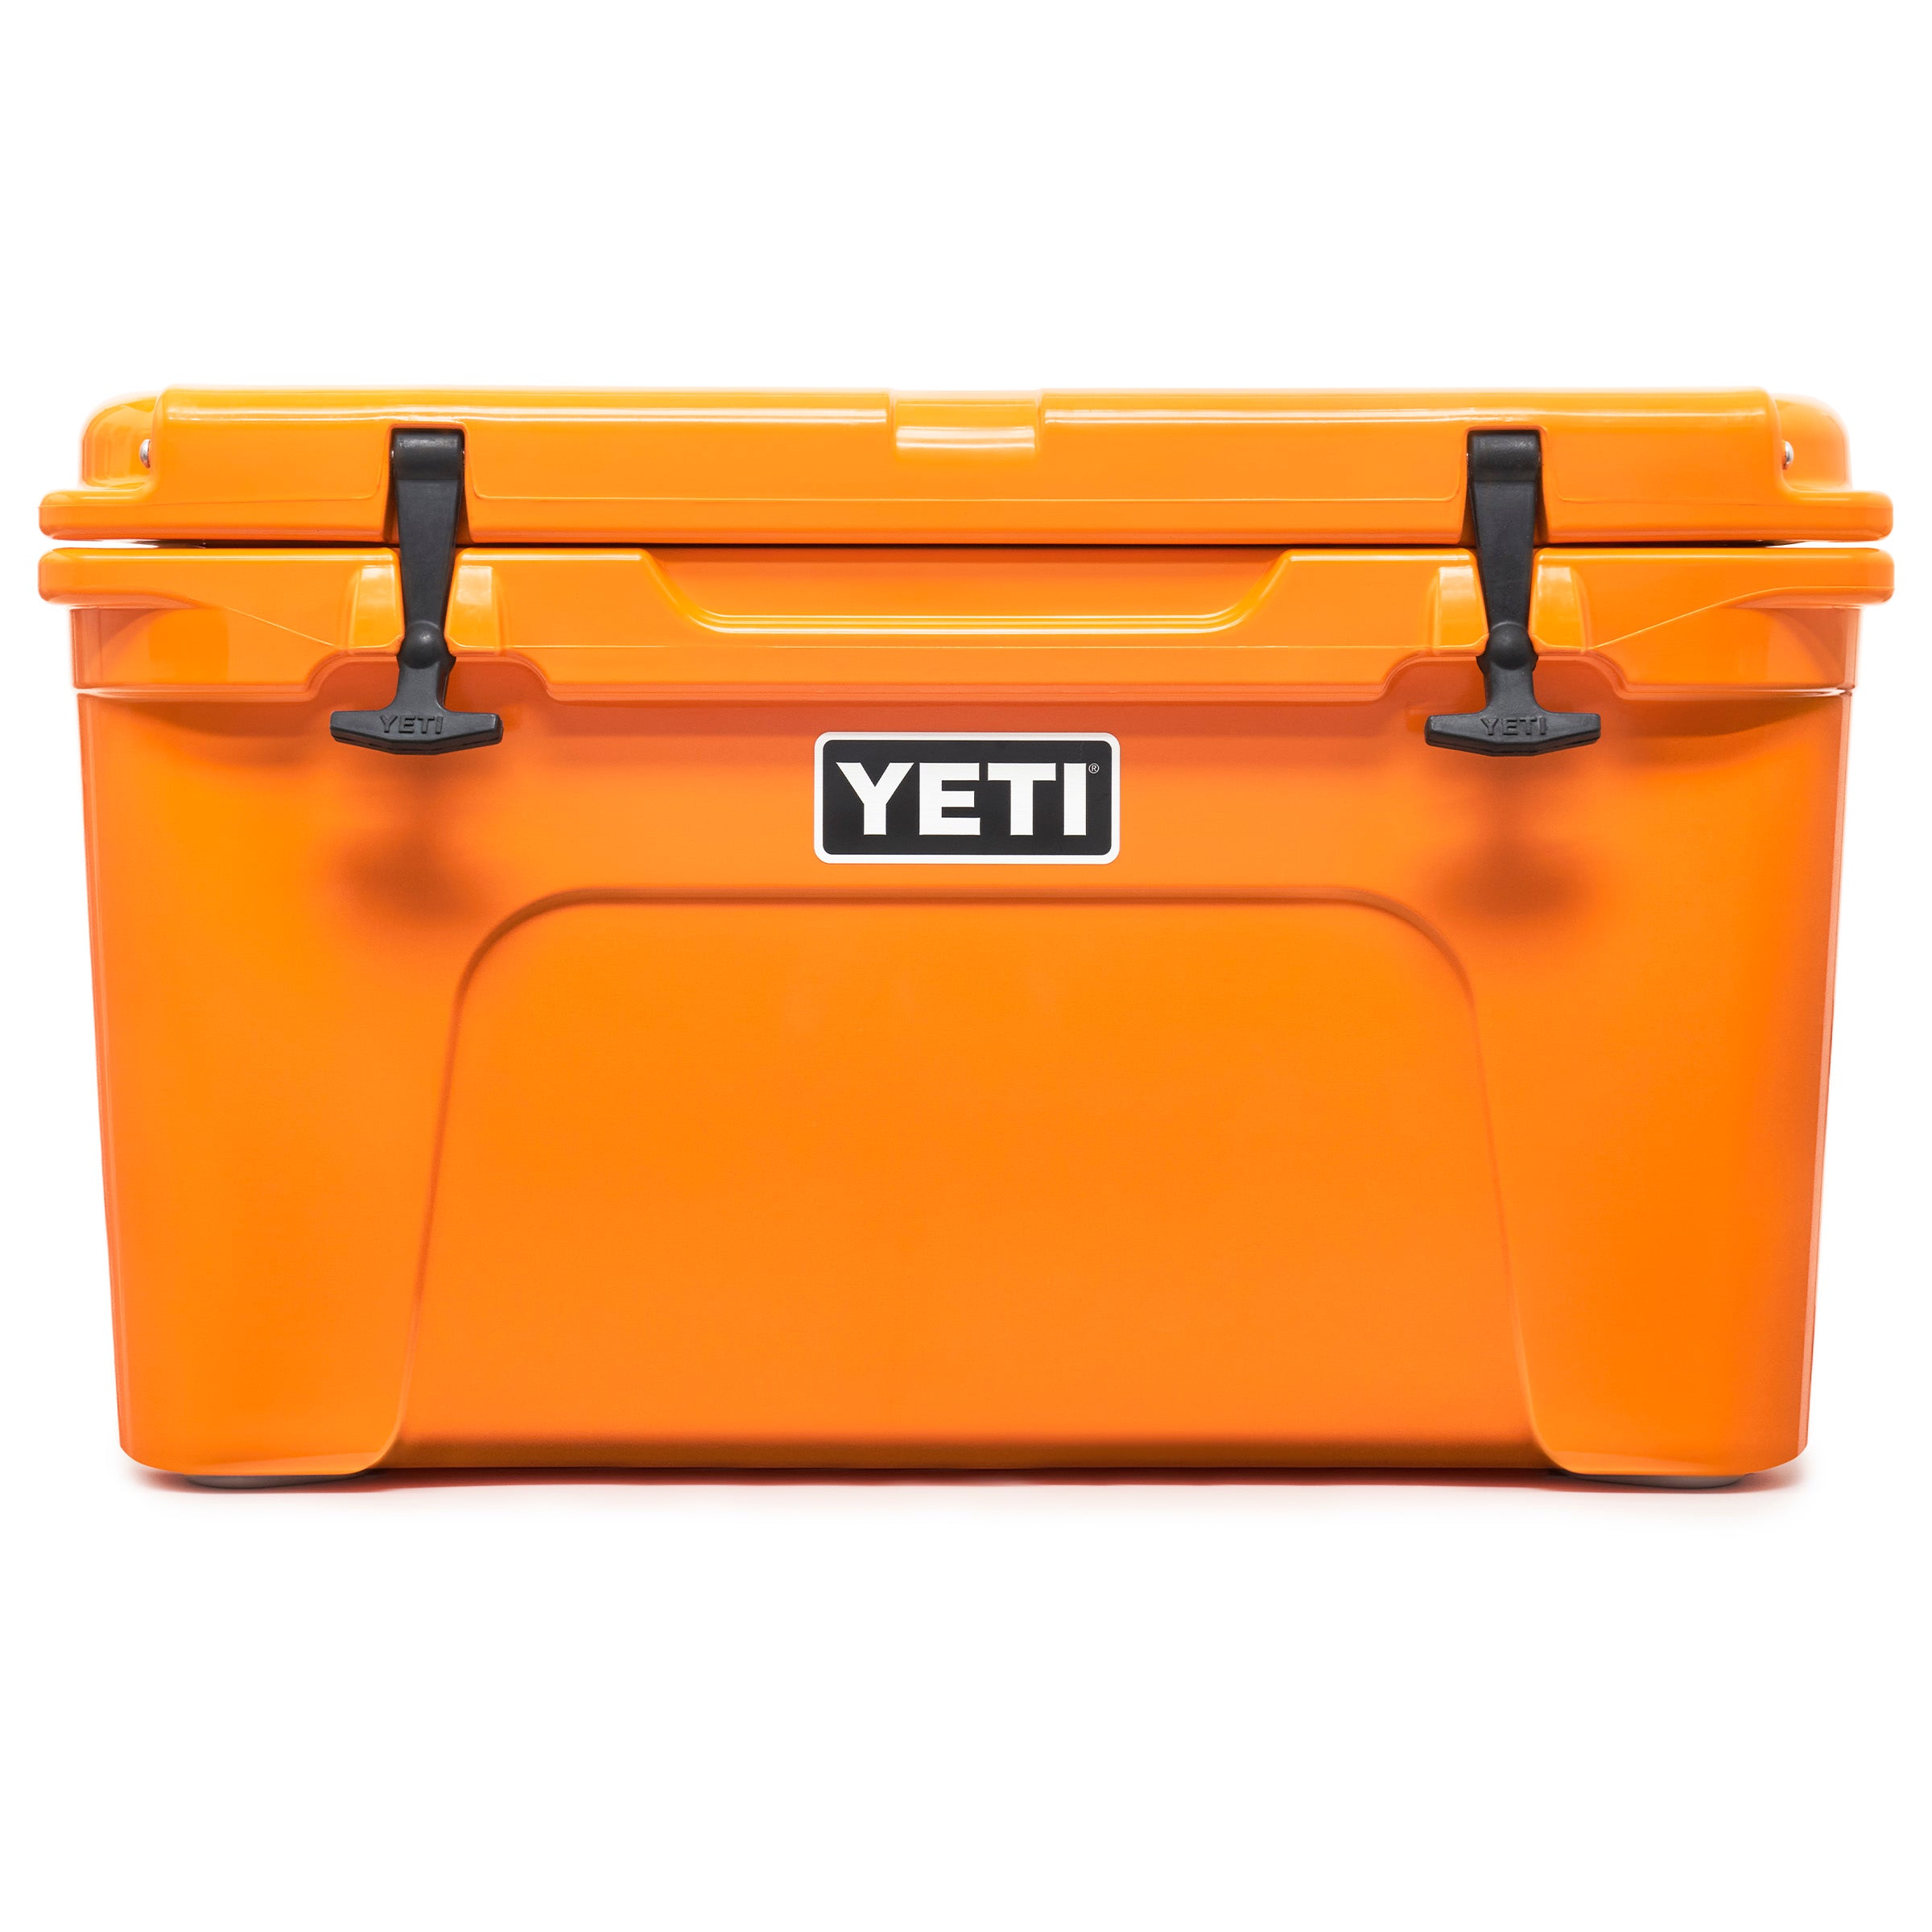 YETI: New in Chartreuse: Tundra Hard Coolers